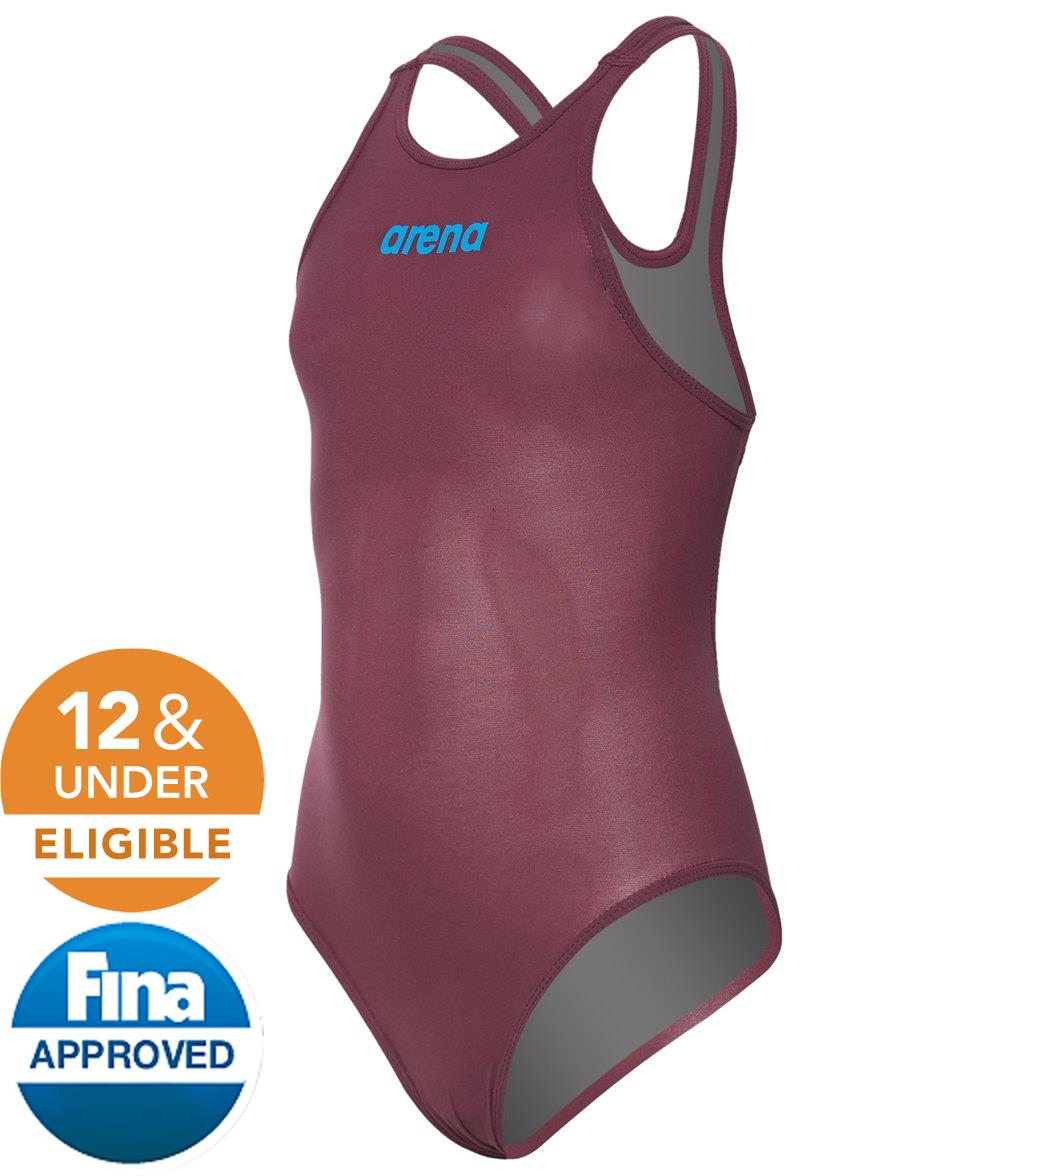 Arena Girls' Powerskin R-Evo Classic Tech Suit Swimsuit - Red Wine/Turquoise 26 Elastane/Polyamide - Swimoutlet.com